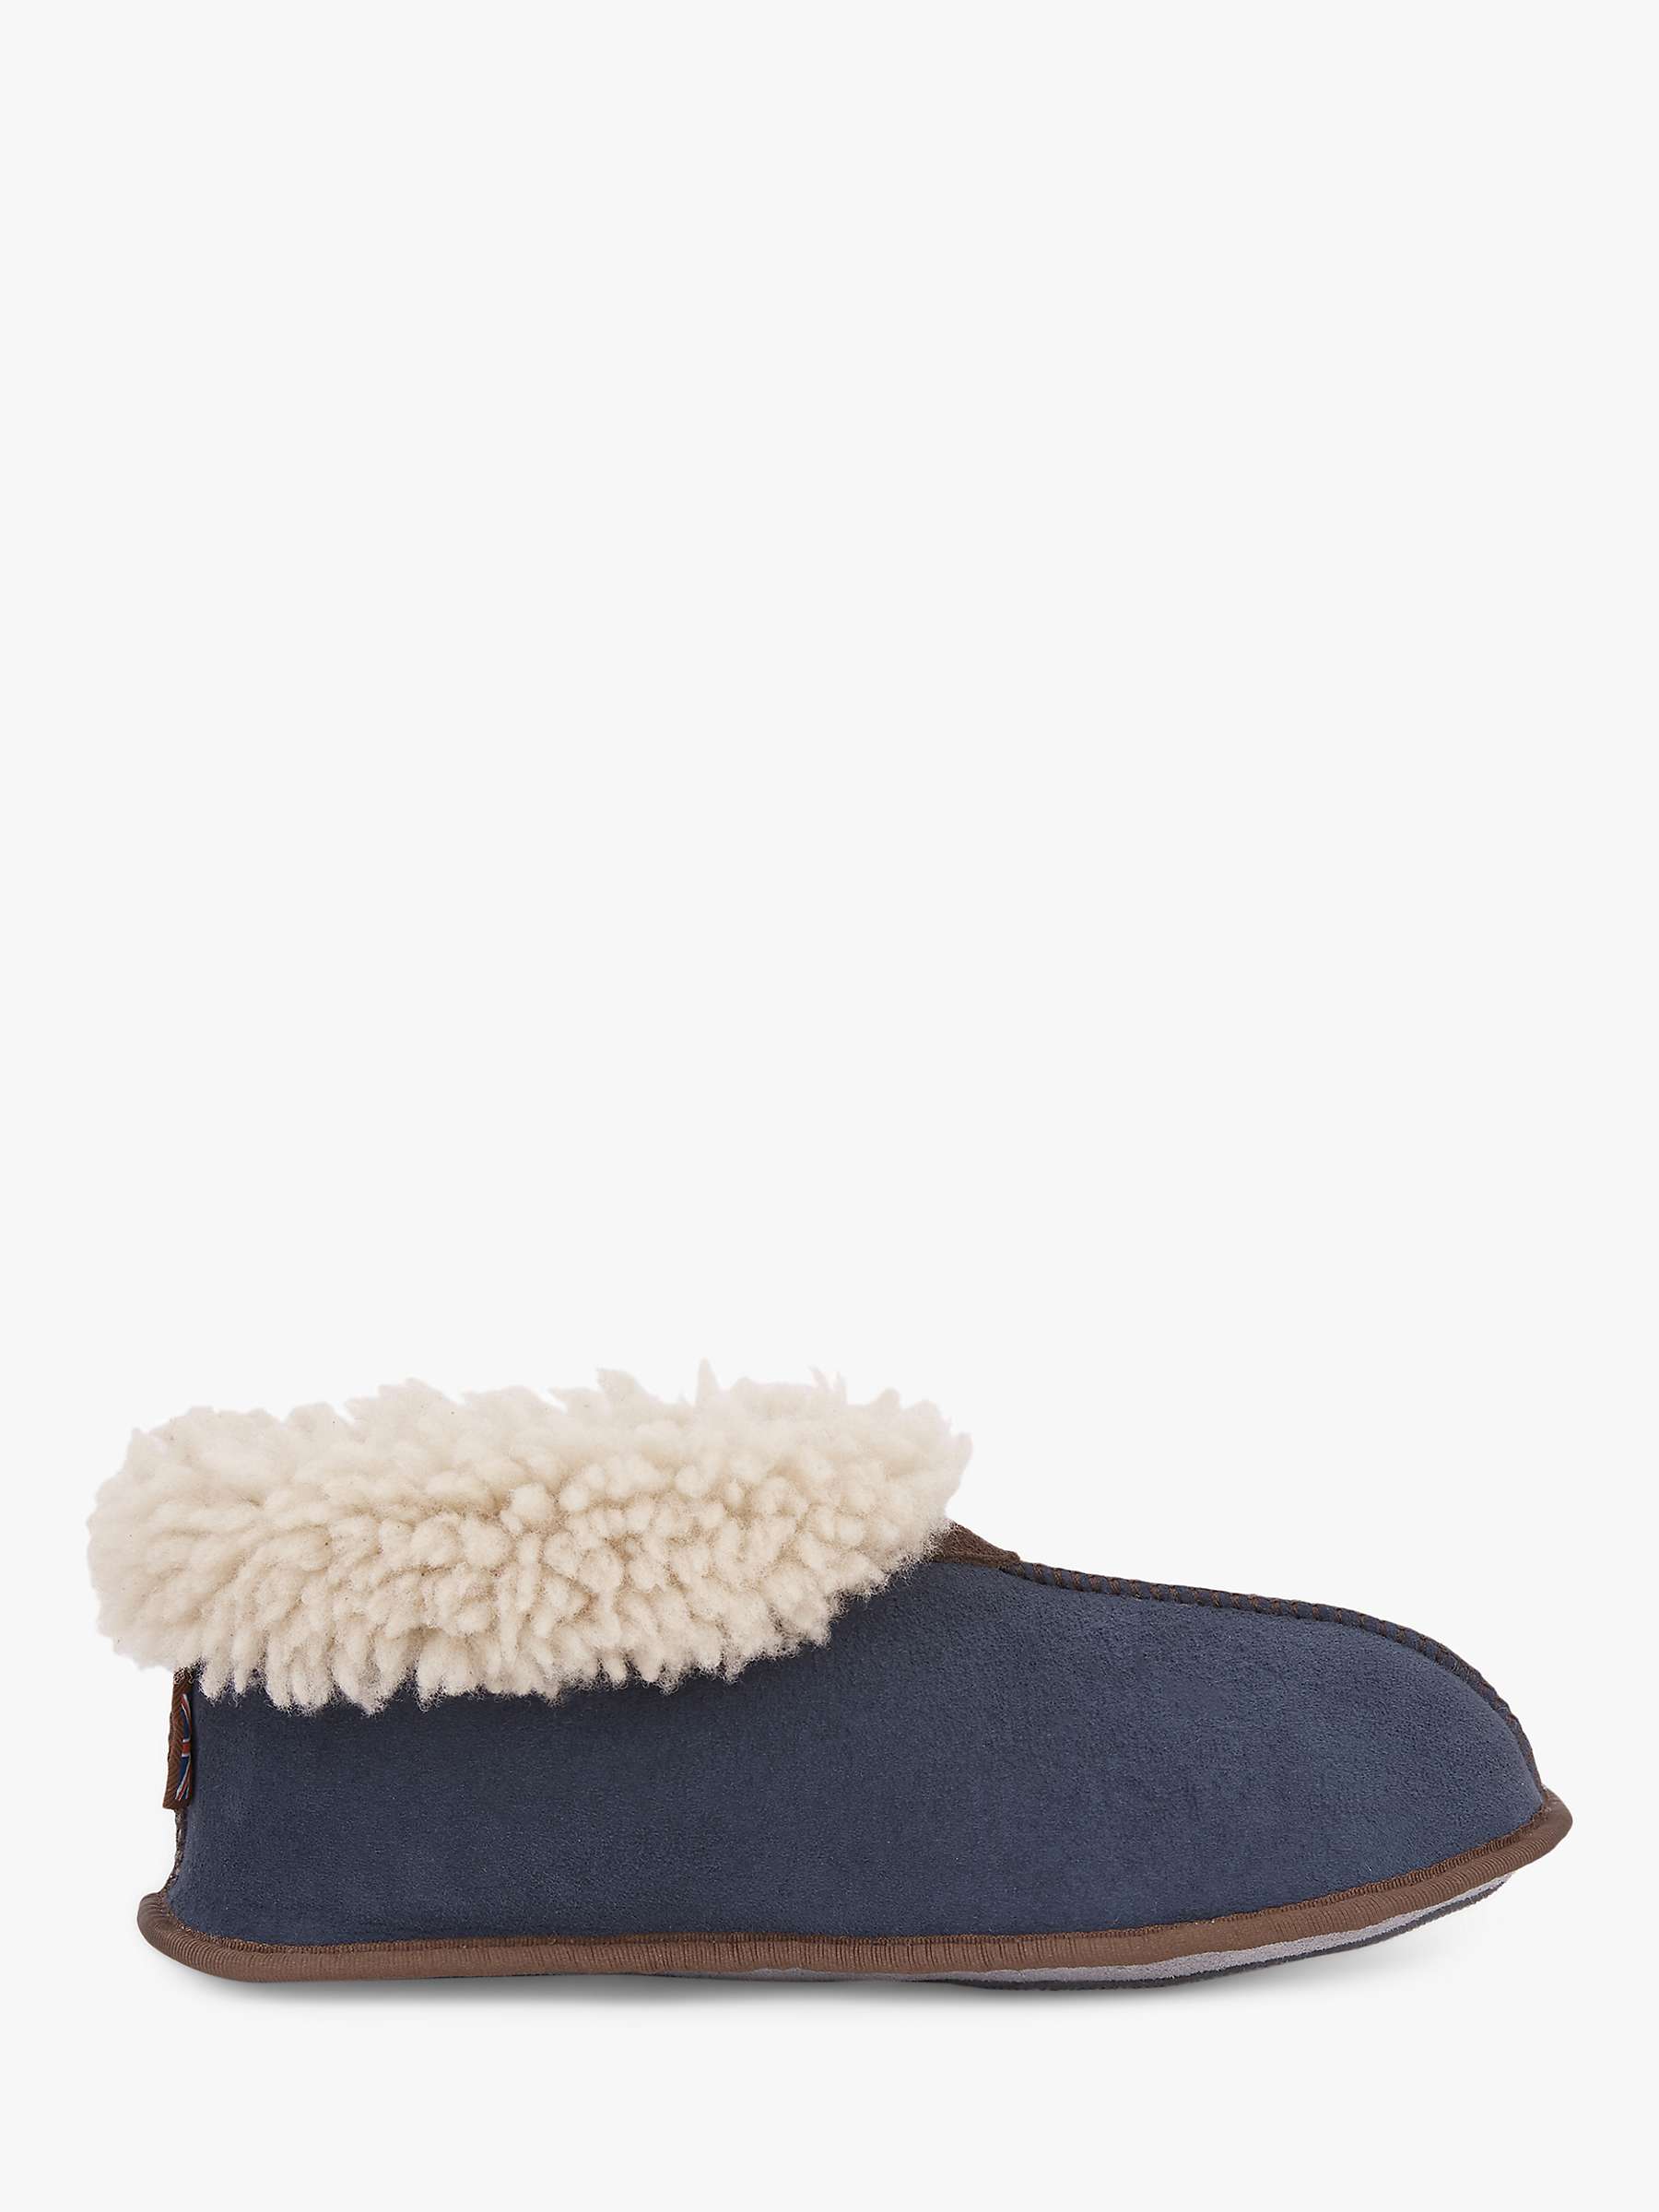 Buy Celtic & Co. Sheepskin Bootee Slippers Online at johnlewis.com